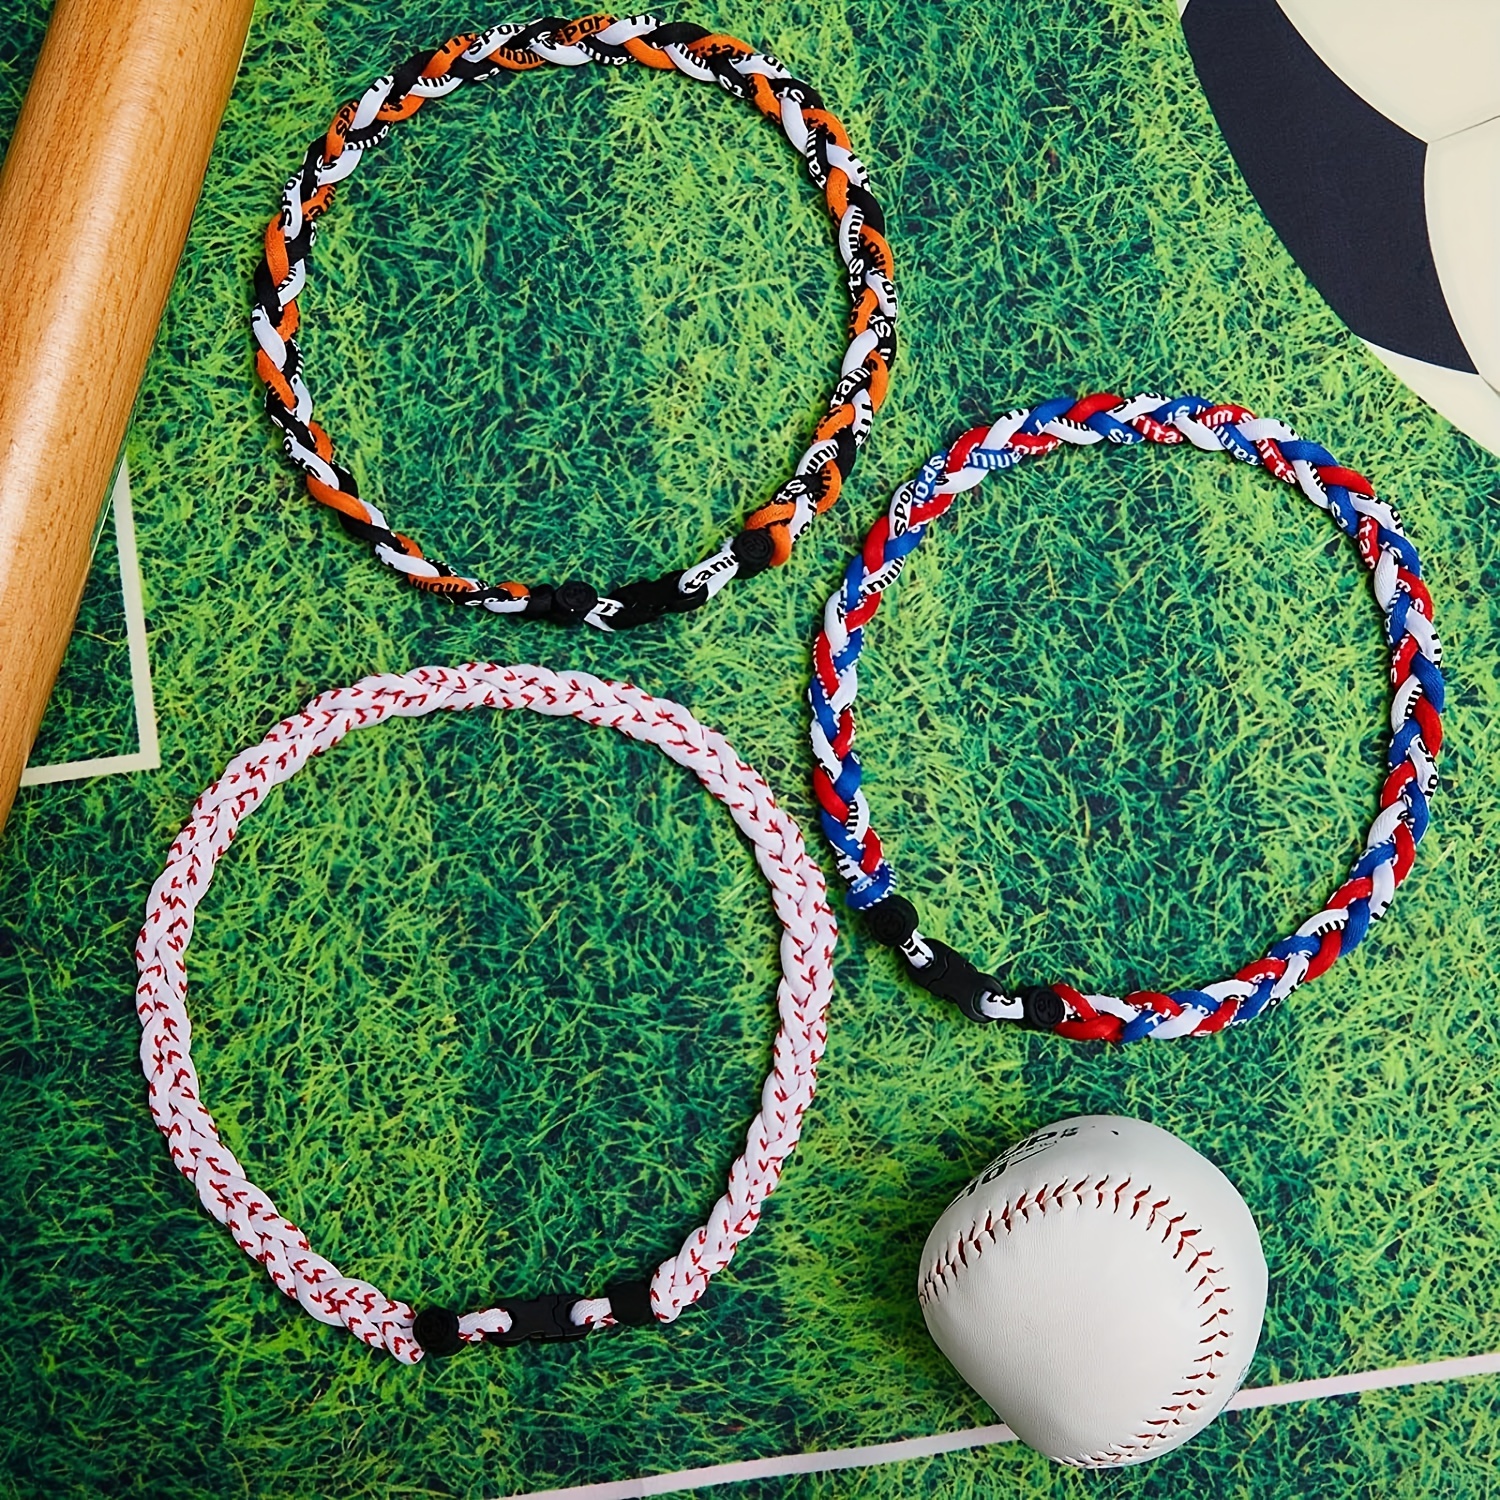 Baseball Necklace - Silver Pendant In 3D Sport Ball